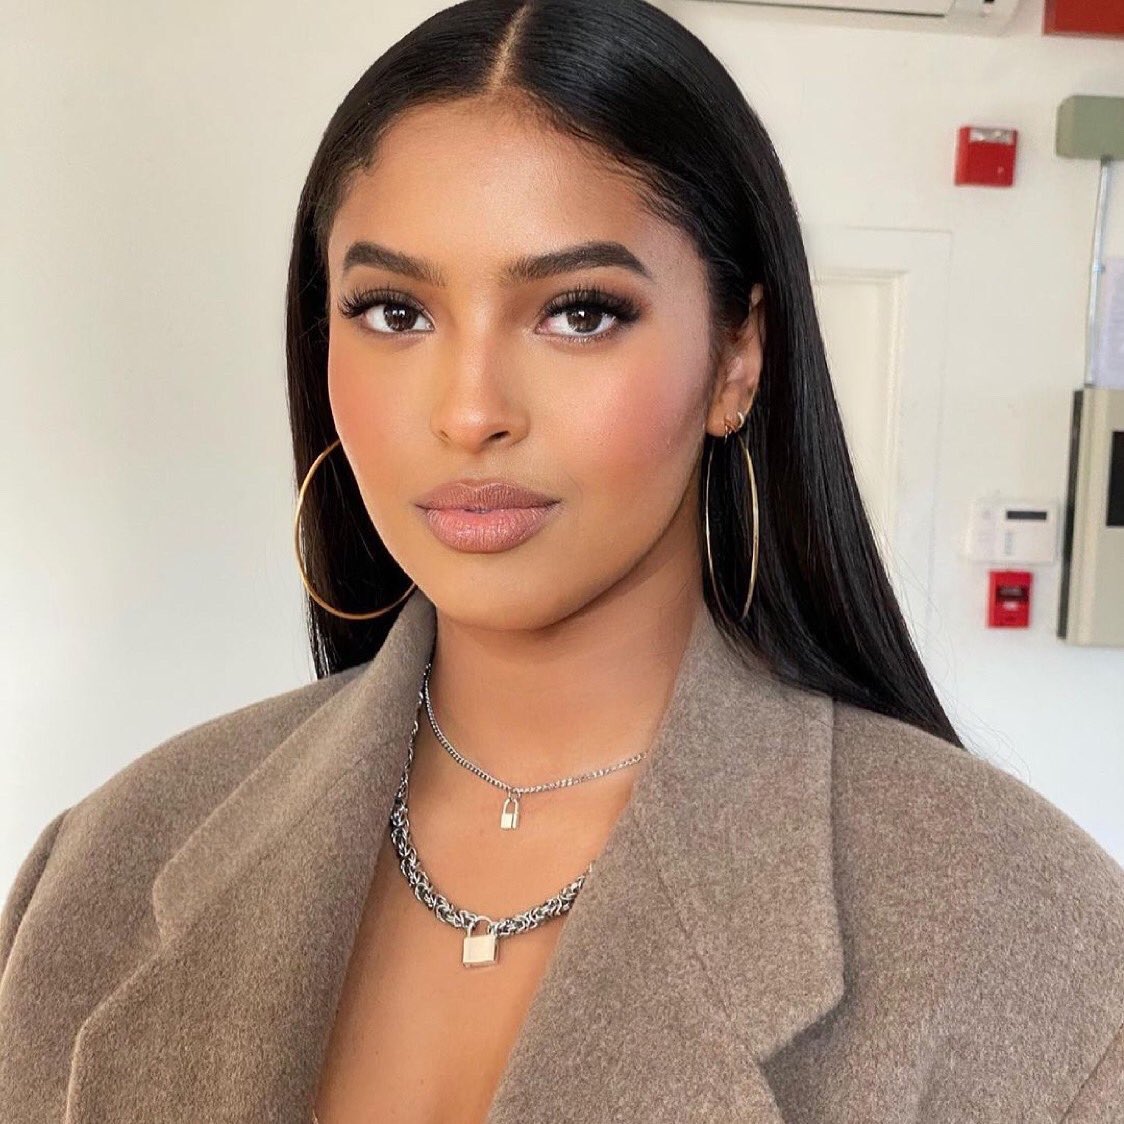 vanessa-bryant-praises-daughter-natalia-for-pursuing-a-modeling-career-daddy-would-be-so-happy​